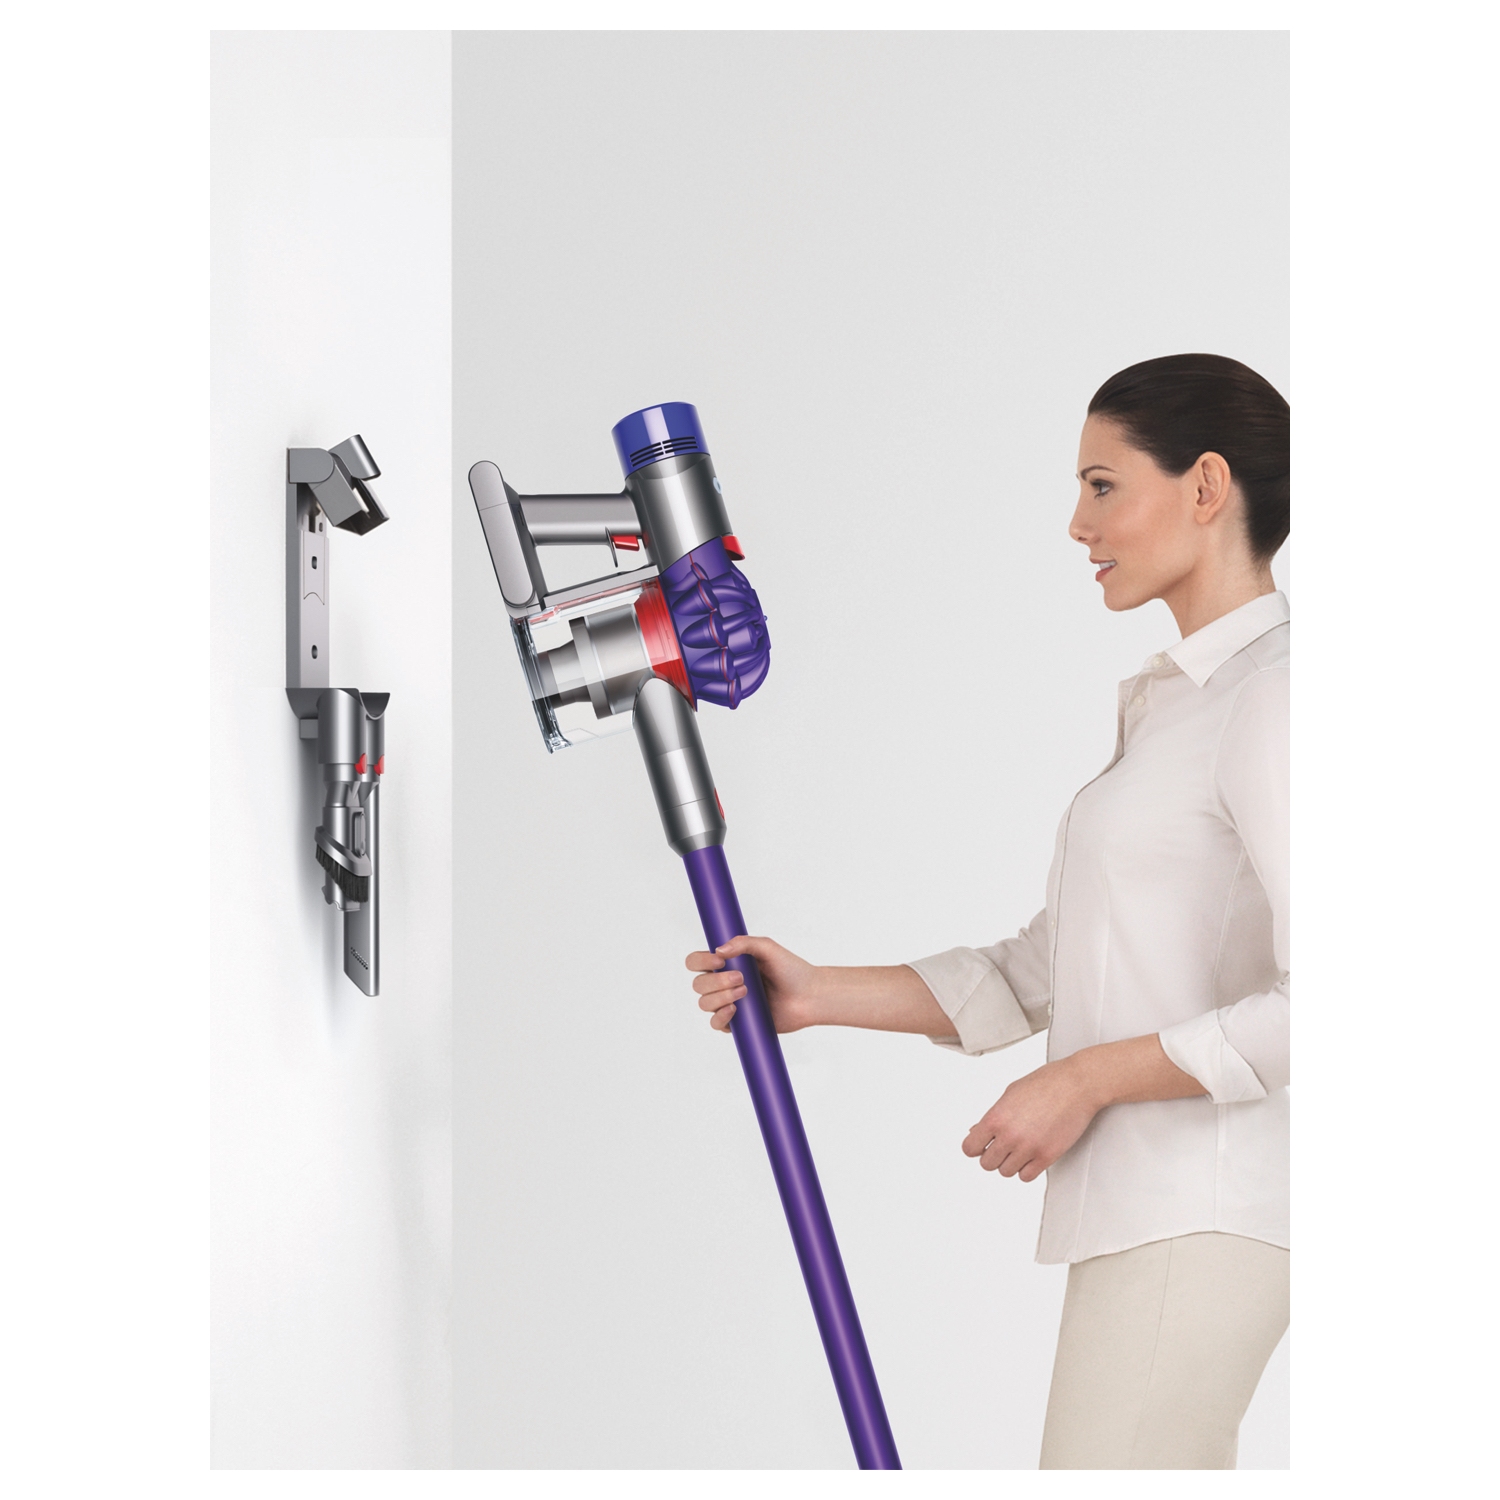 Dyson V7ANIMAL Cordless Vacuum Cleaner - 30 Minute Run Time with Complete Cleaning Kit - 1